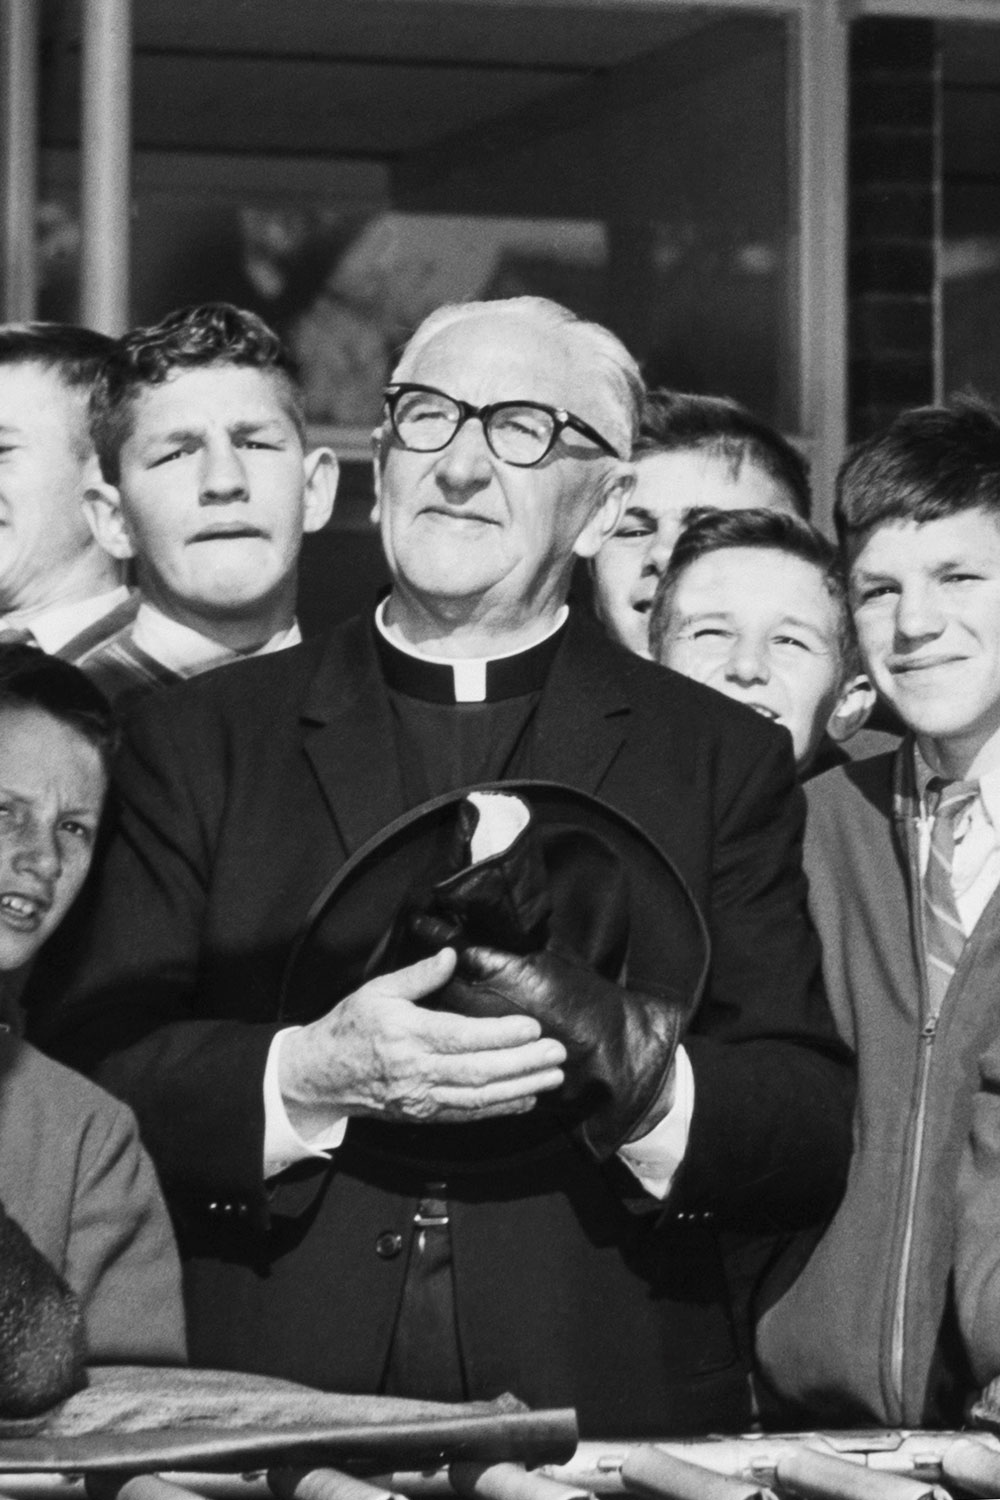 Image 2 of 5 - A closeup of Father Dunlea surrounded by a group of smiling boys at Boys Town in Engadine, now known as the Dunlea Centre. Father Dunlea holds his hat and gloves in his hands in a moment of reflection.